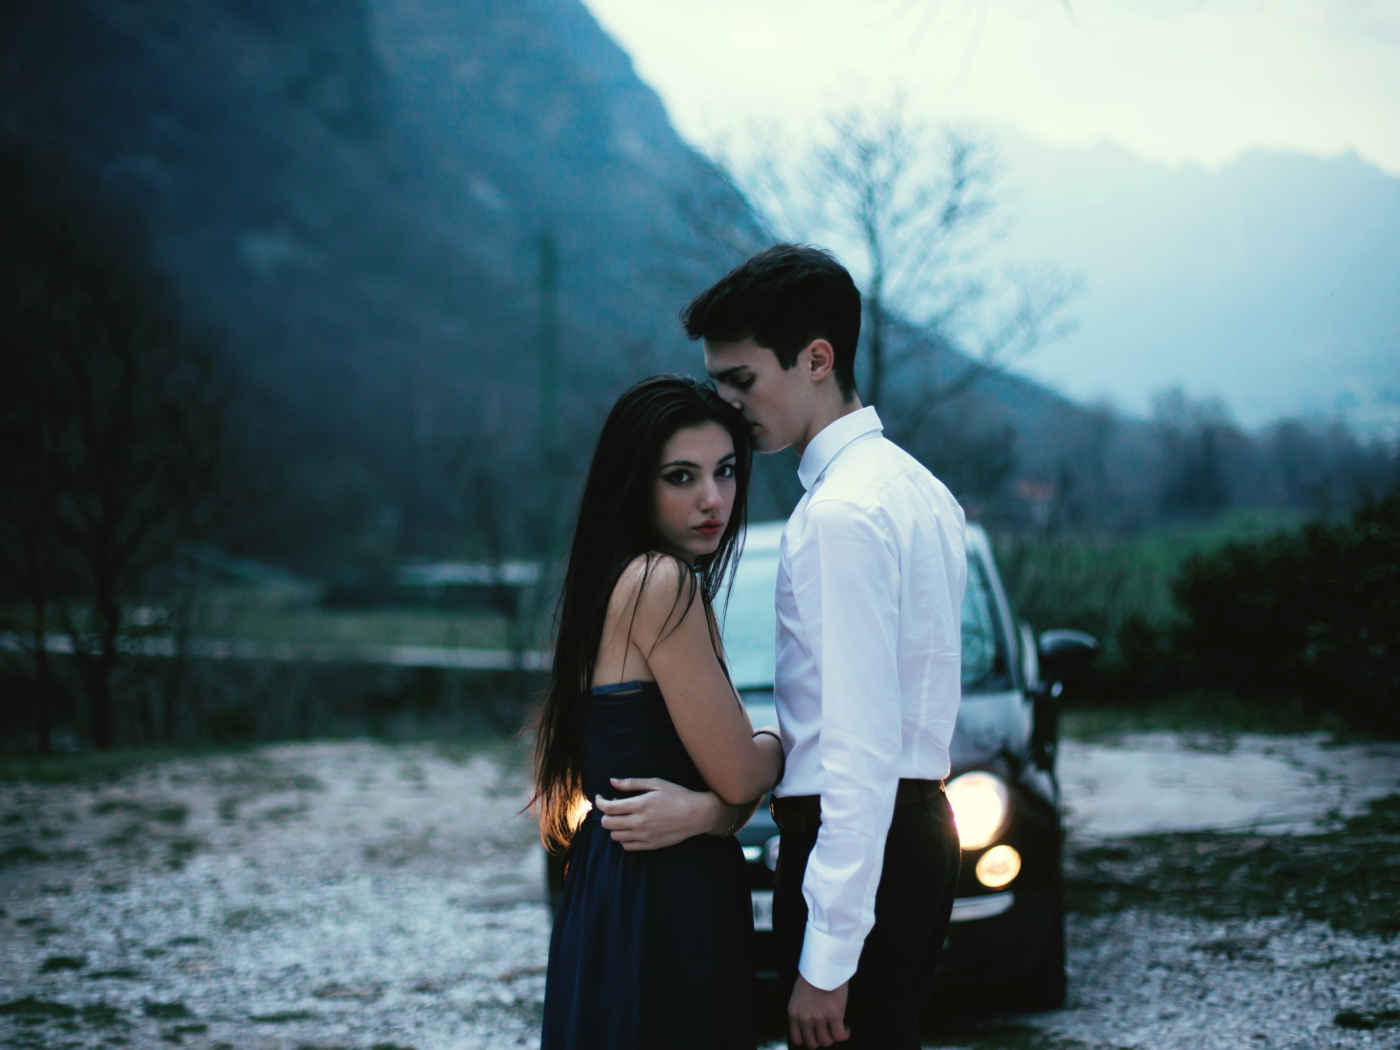 Couple In Front Of Car wallpaper 1400x1050